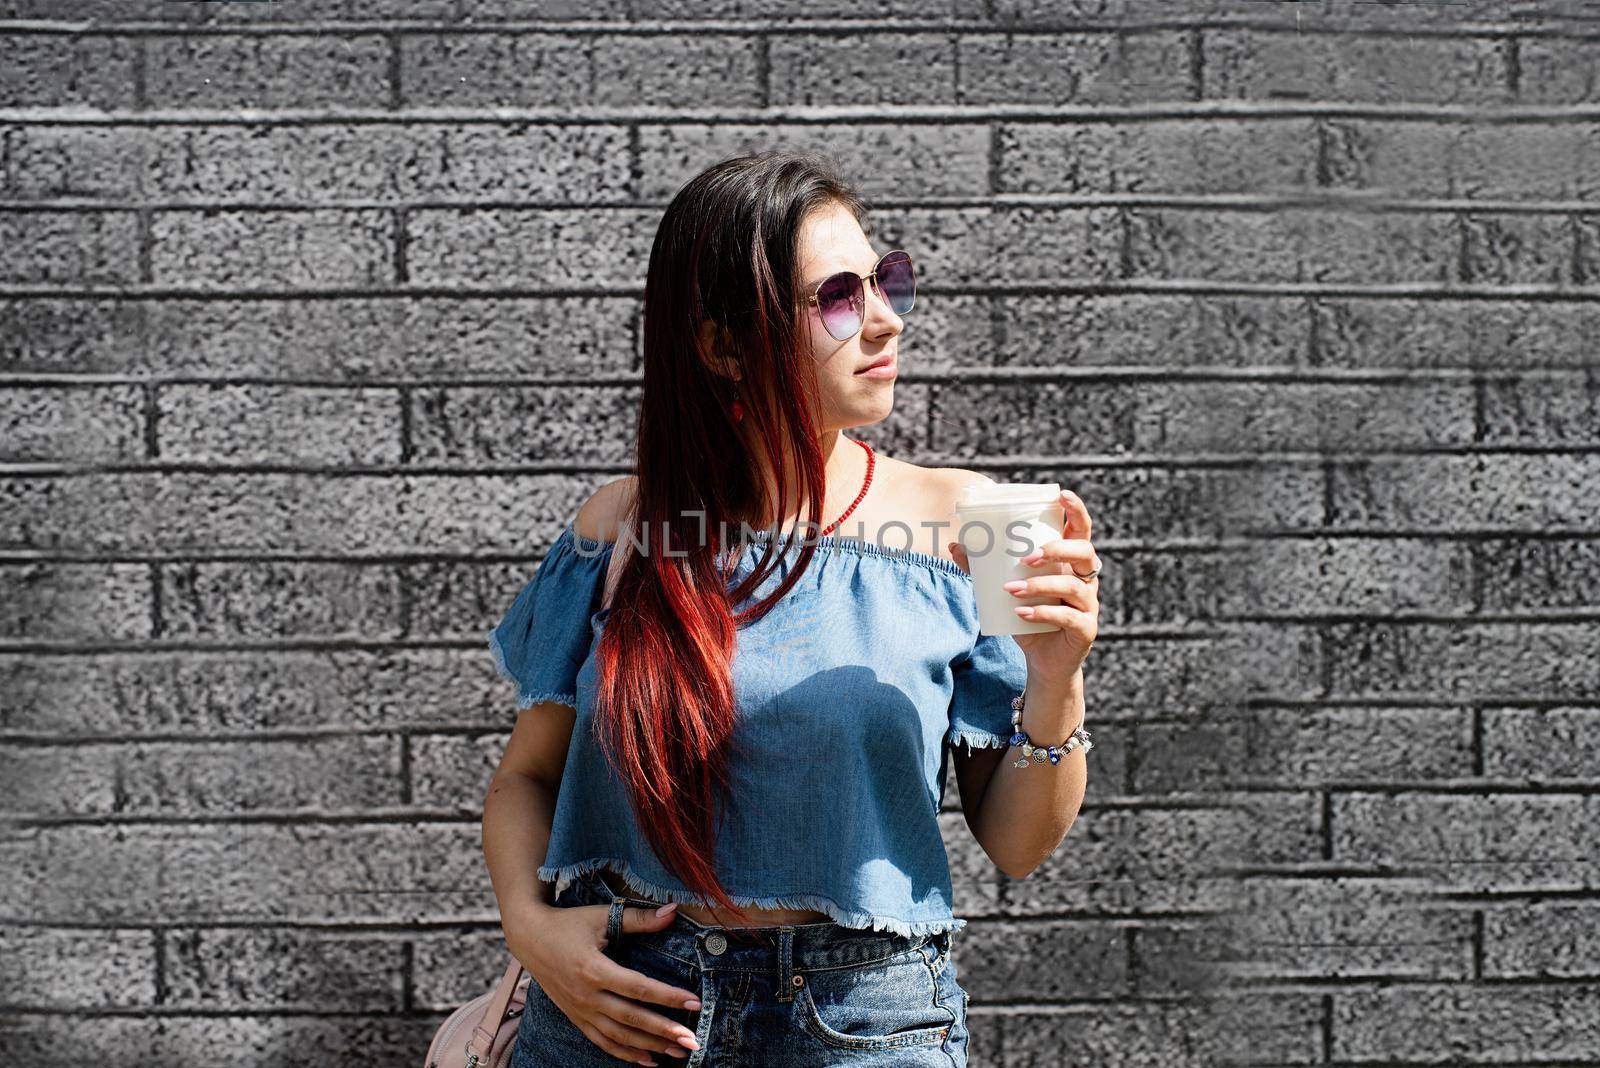 coffee to go. stylish young woman wearing jeans shirt, sunglasses and bag, drinking coffee to go at street, black brick wall background